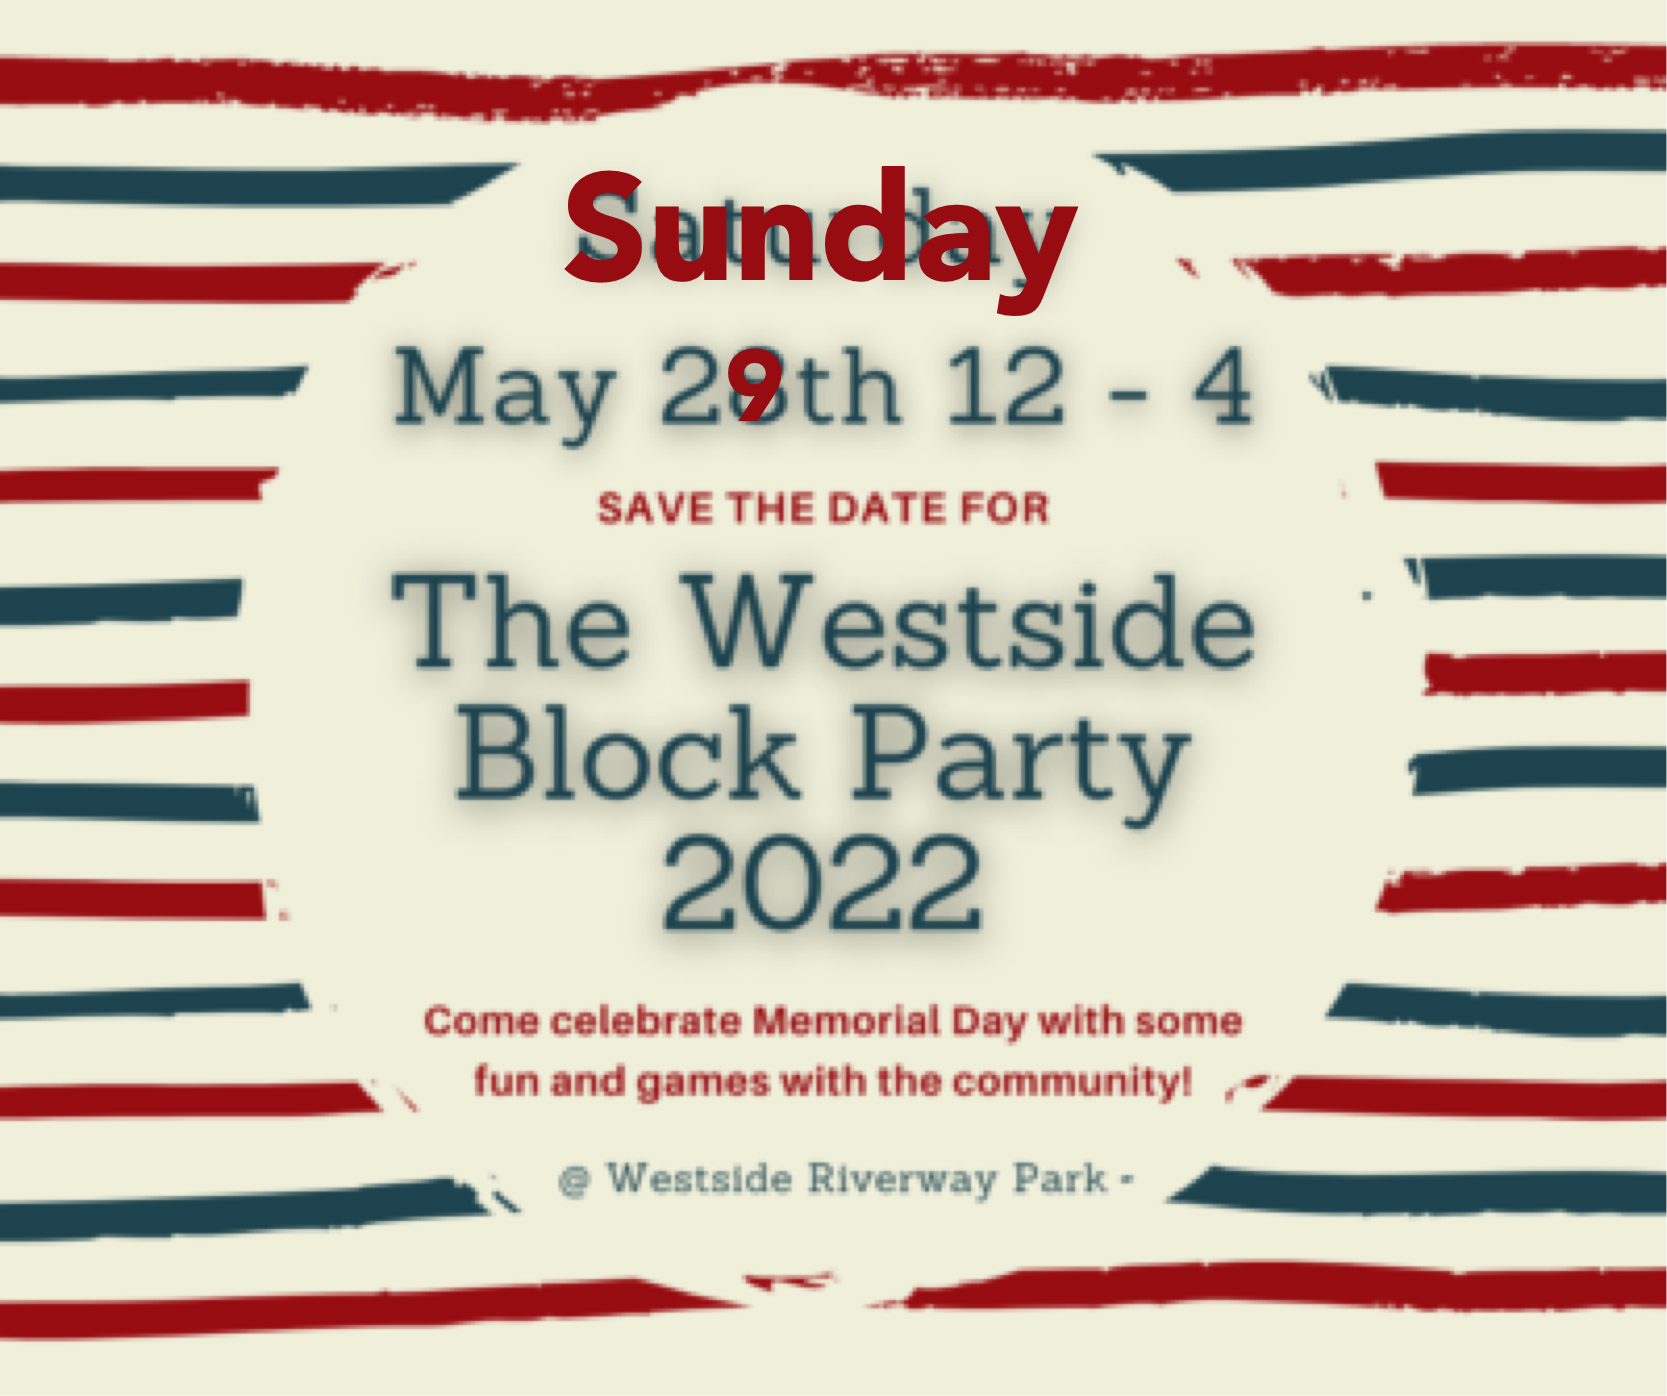 West Side Block Party postponed to Sunday